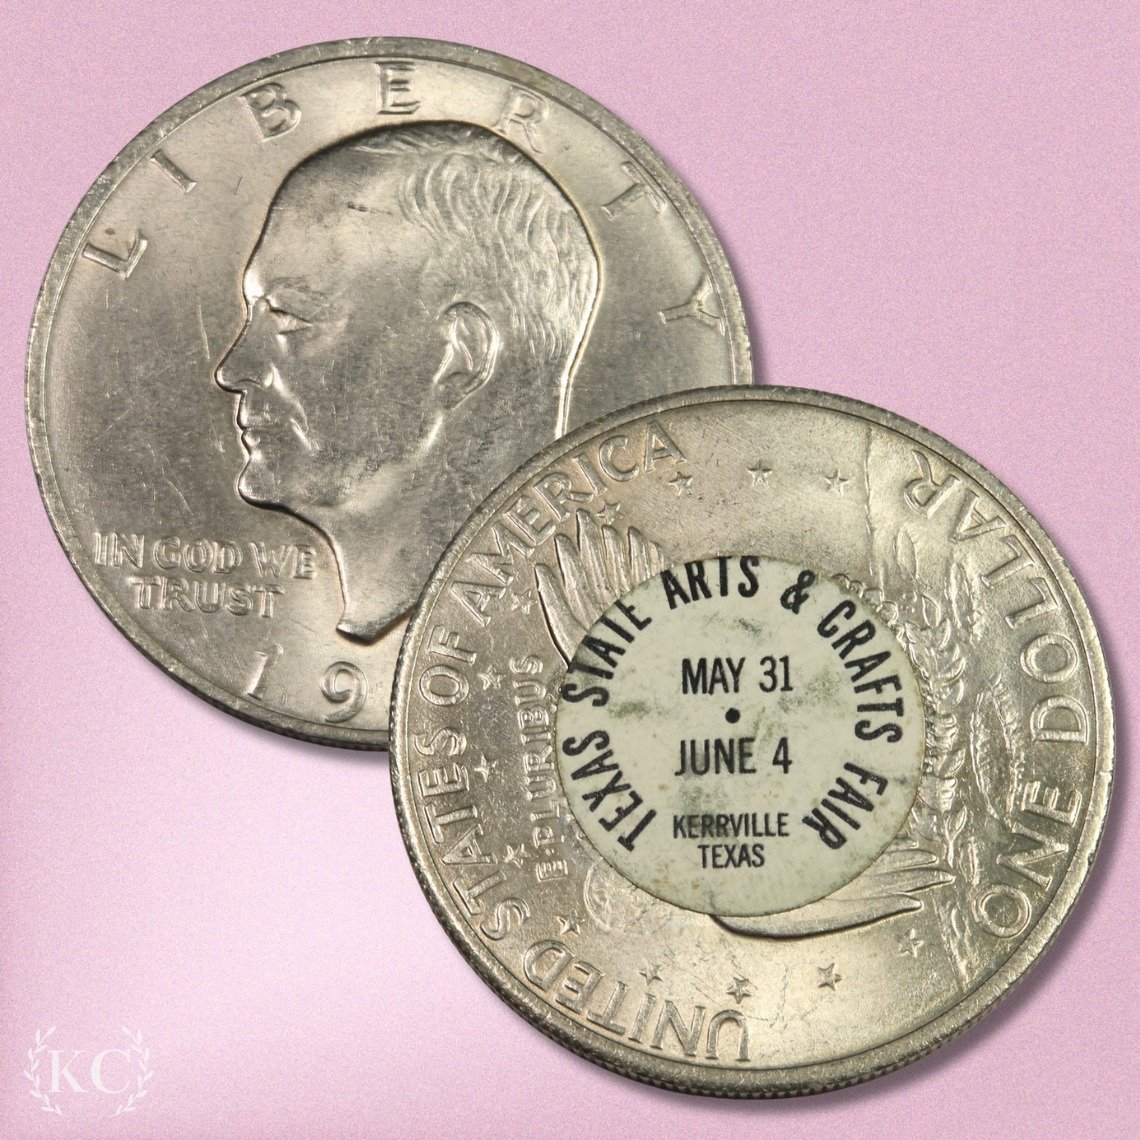 Craft your collection with a piece of history!🎨
Get this 1971 Texas State Arts &amp; Craft Fair Ike Dollar today!

#Art #Coins #Texas #Money